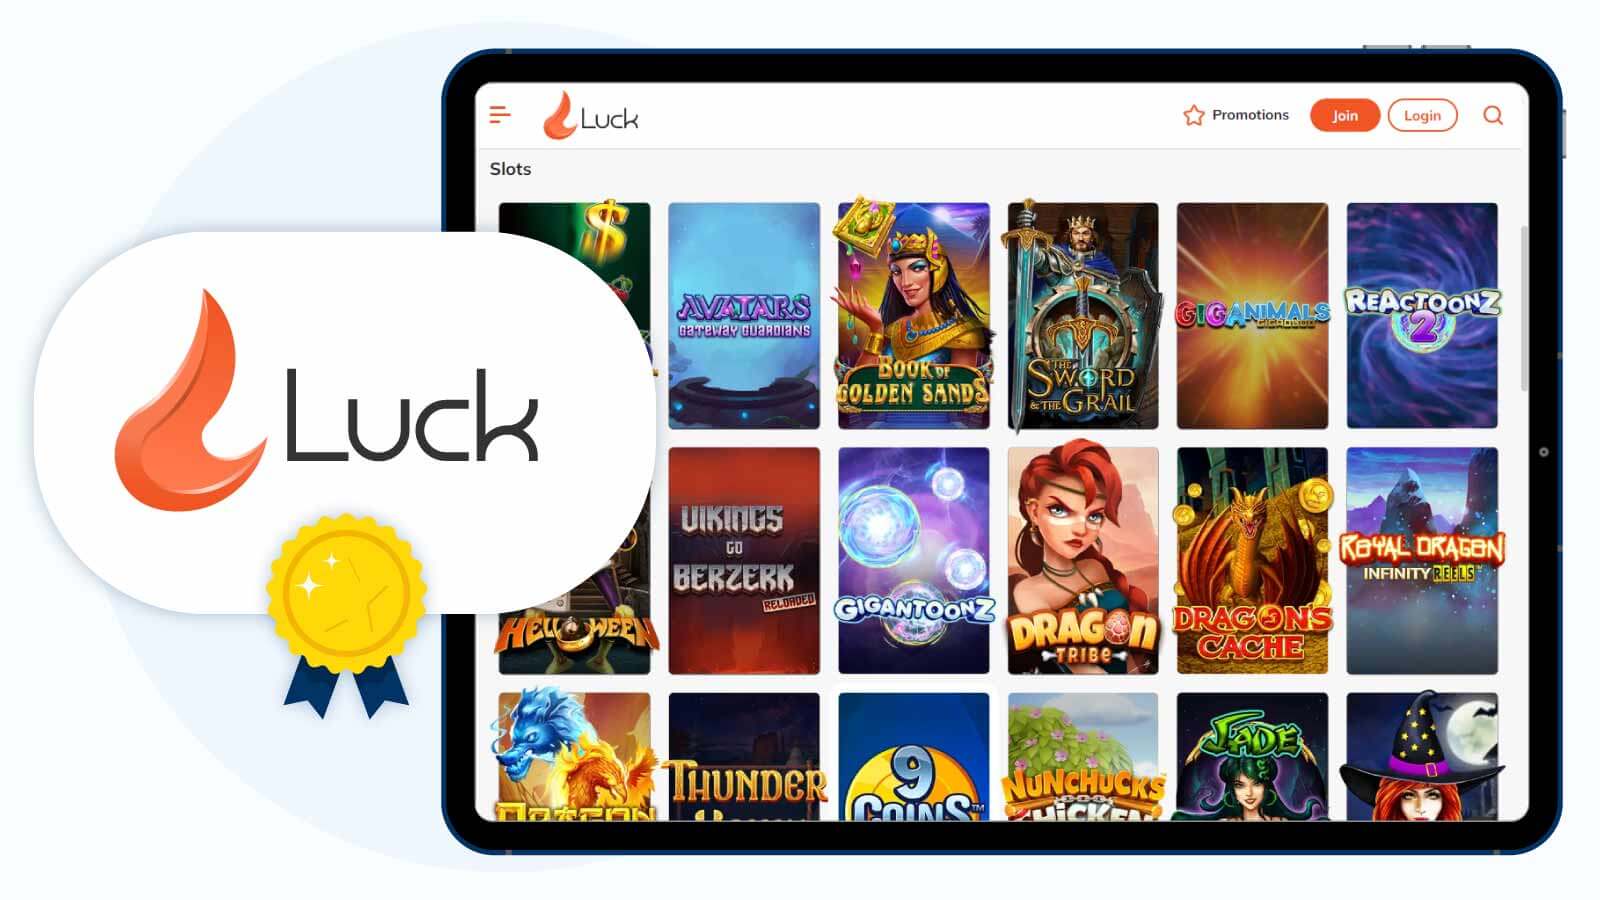 Best Casino with 100 Free Spins No Deposit: Luck.com